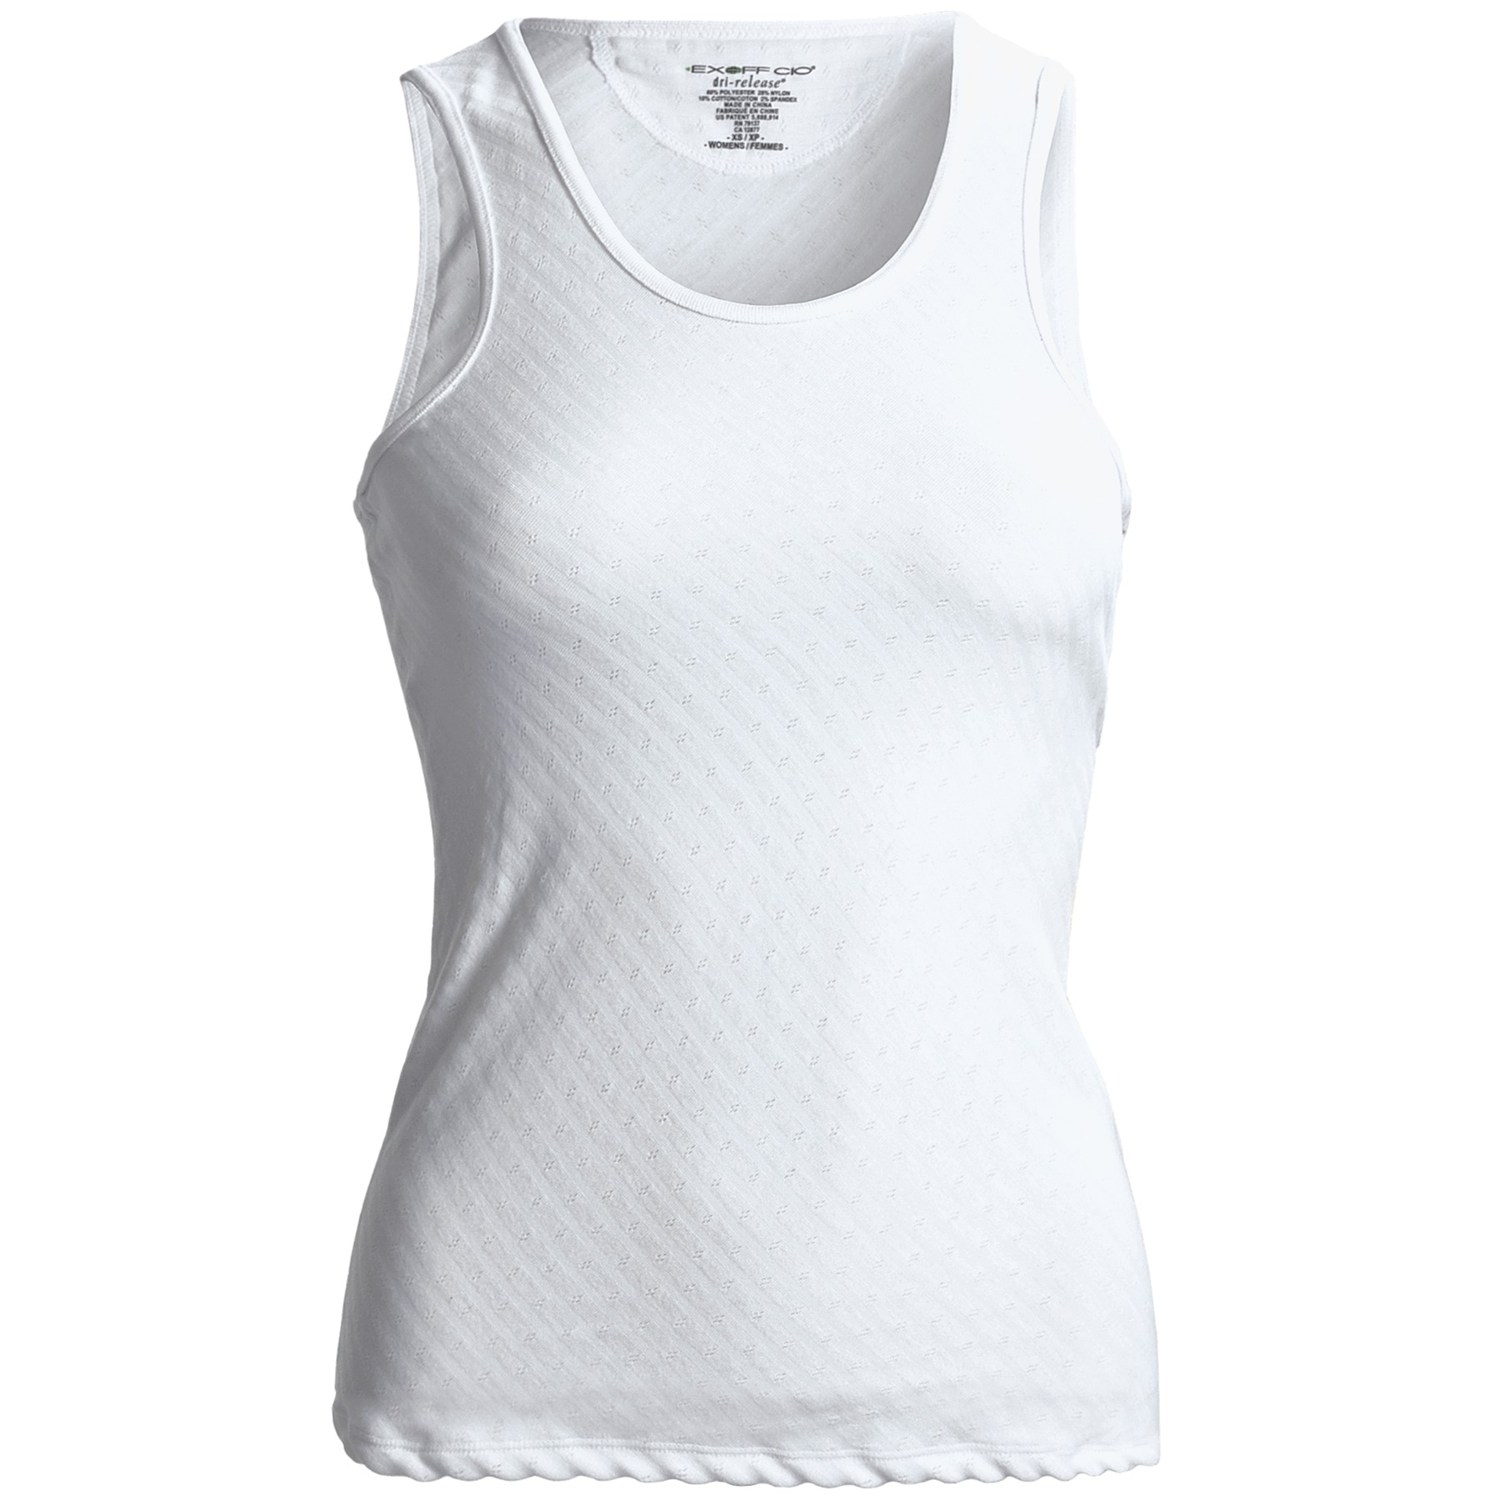 25 Images of White Tank Top Template | infovia.net